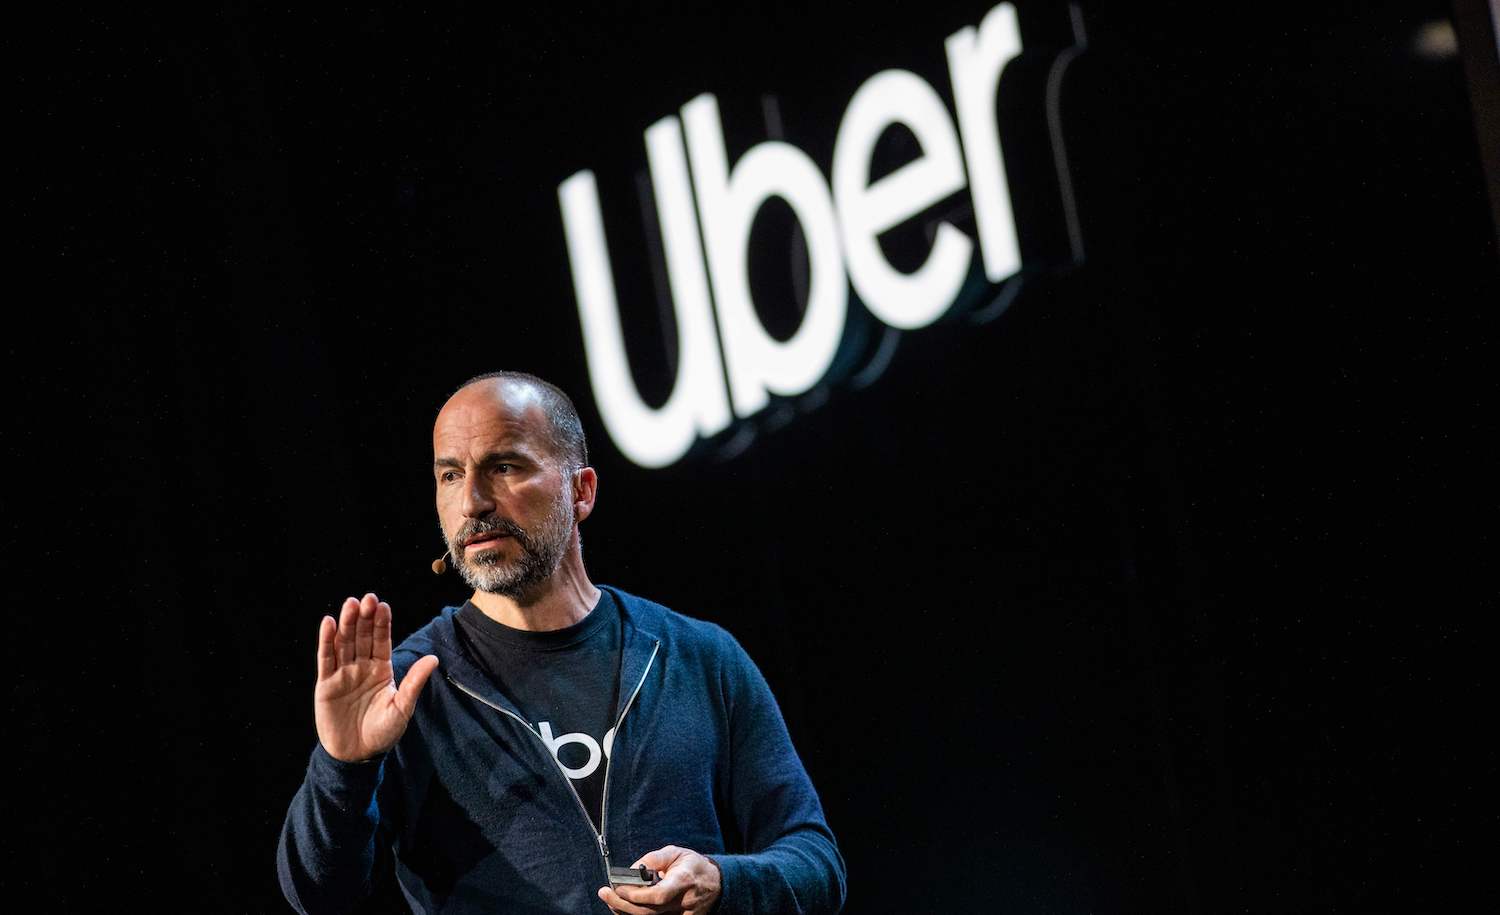 Uber CEO Dara Khosrowshahi addresses the audience during the keynote at the start an Uber products launch in San Francisco, California on September 26, 2019. - Uber on Thursday unveiled a new version of its smartphone app that weaves together services from shared rides to public transit schedules while adding more security features. The upgraded app is intended to let Uber users see, and ideally tap into, the company's array of options for getting around or having restaurant meals delivered. (Photo by Philip Pacheco / AFP) (Photo by PHILIP PACHECO/AFP via Getty Images)